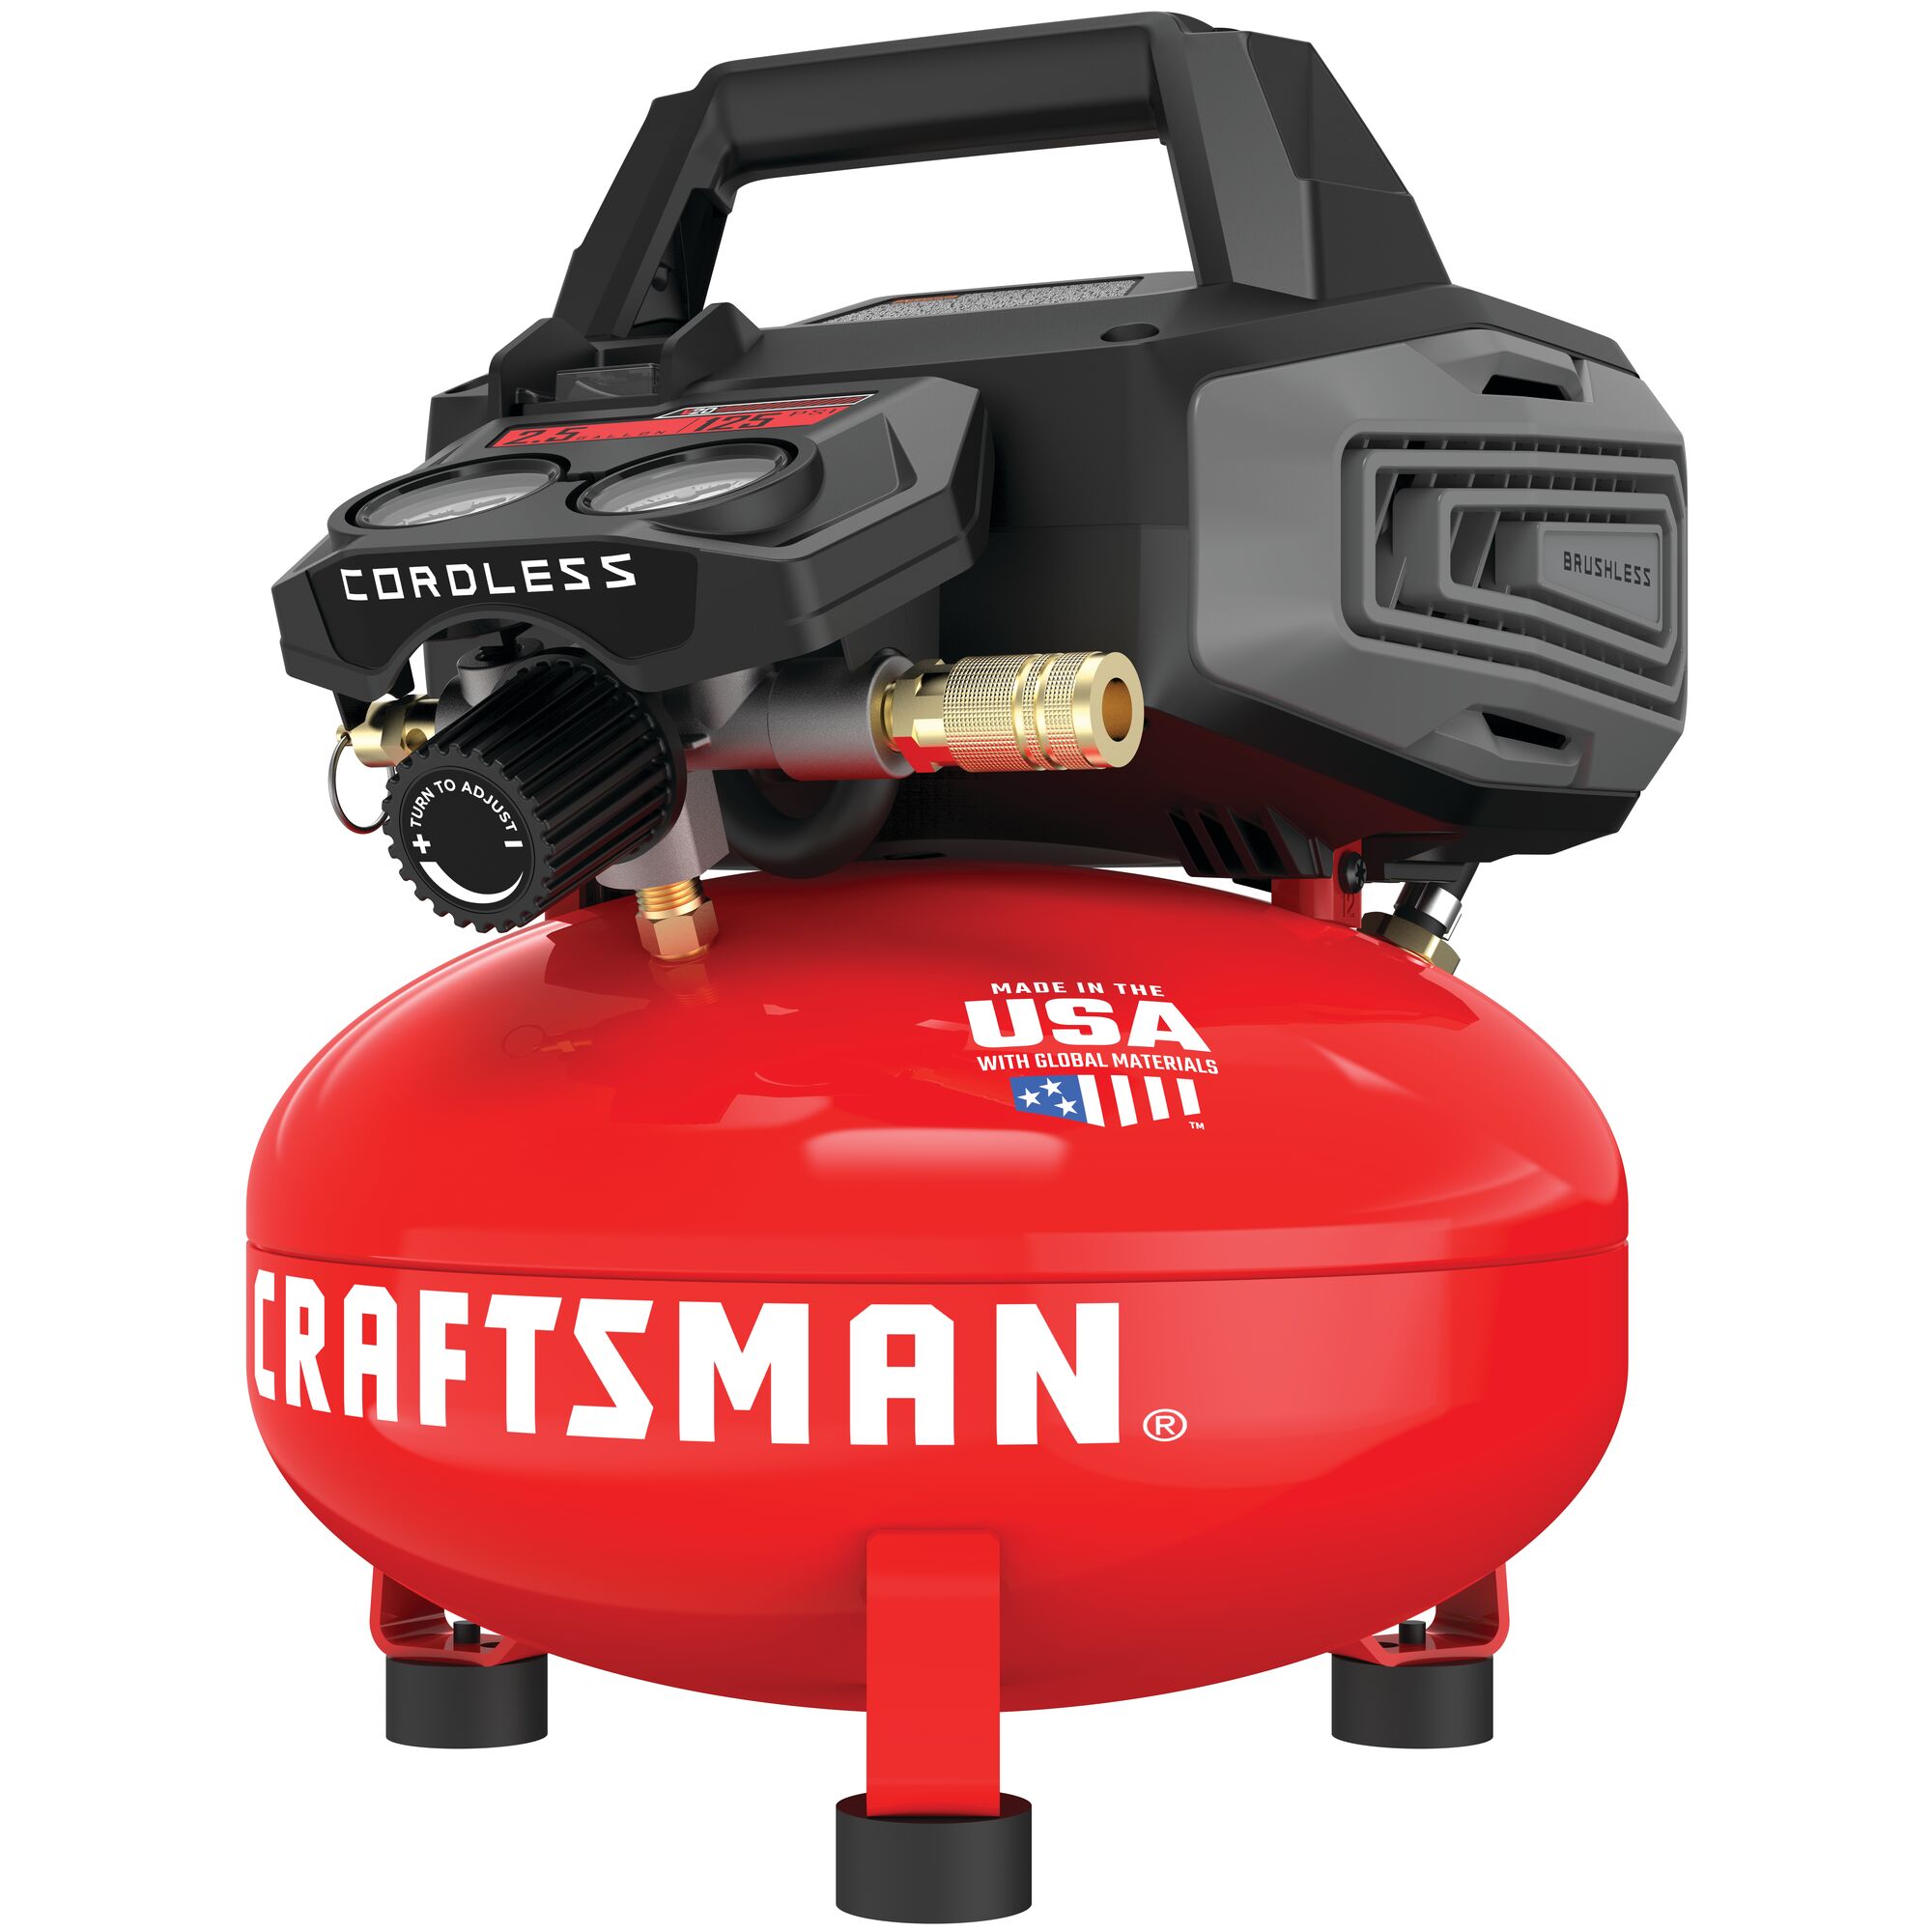 View of CRAFTSMAN Air Tools & Compressors family of products